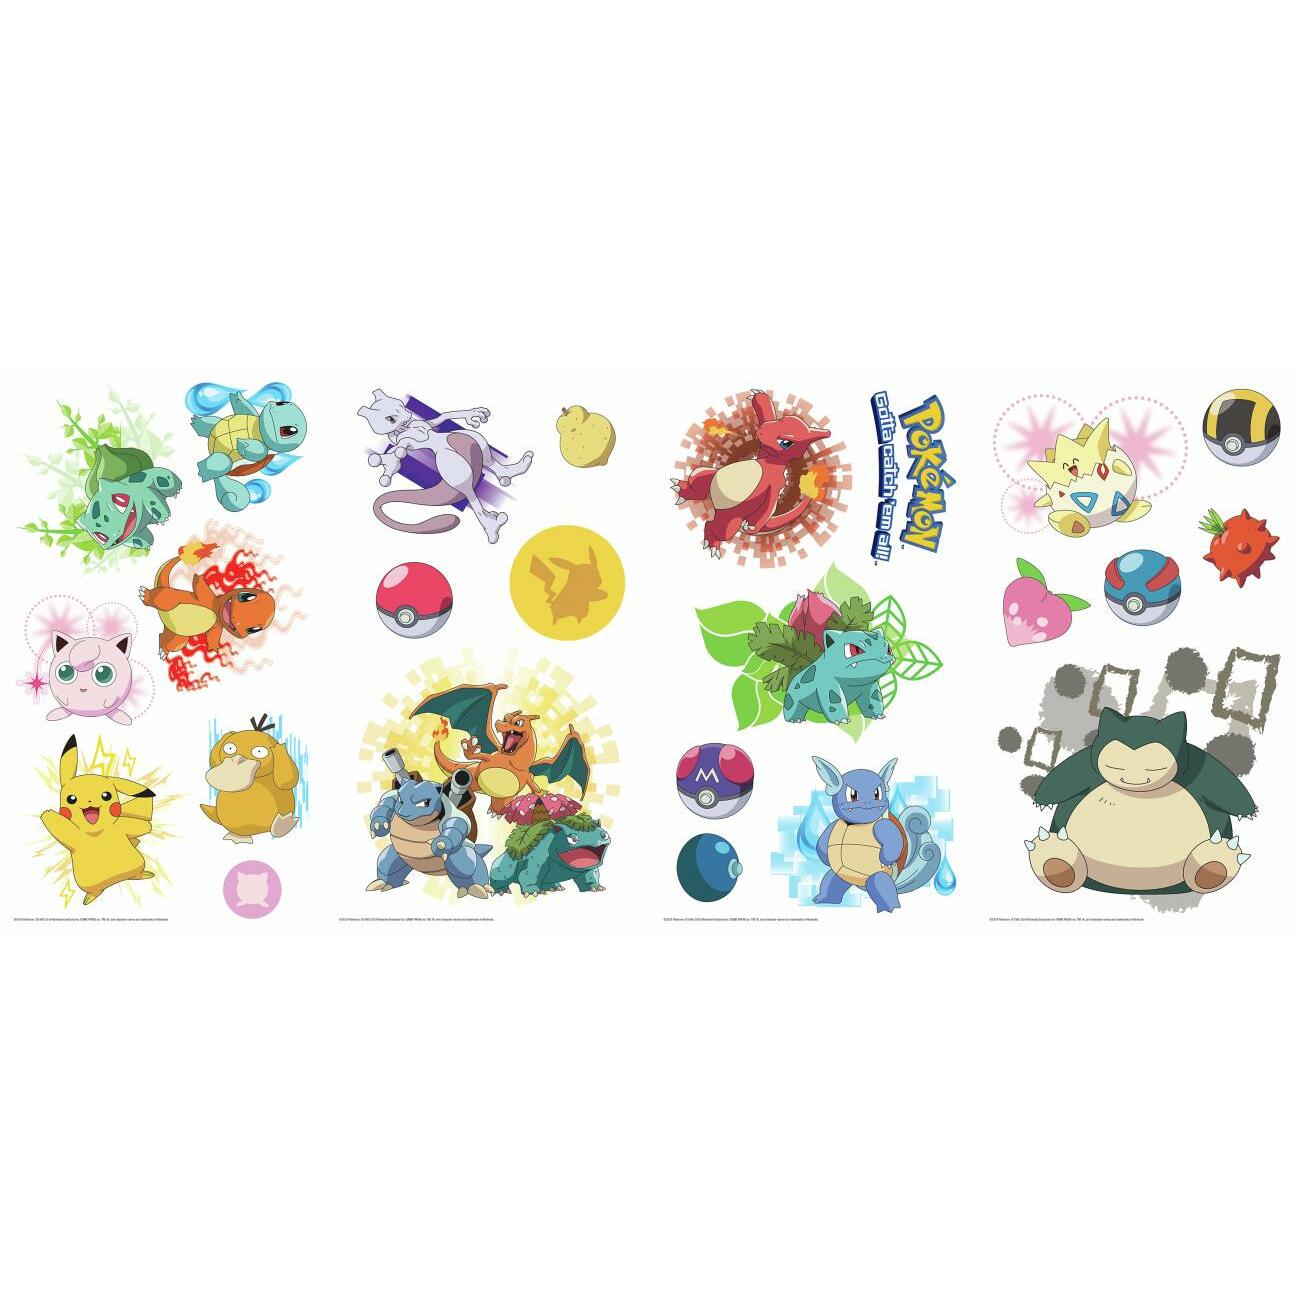 Iconic Pokemon Wall Decals Wall Decals RoomMates   